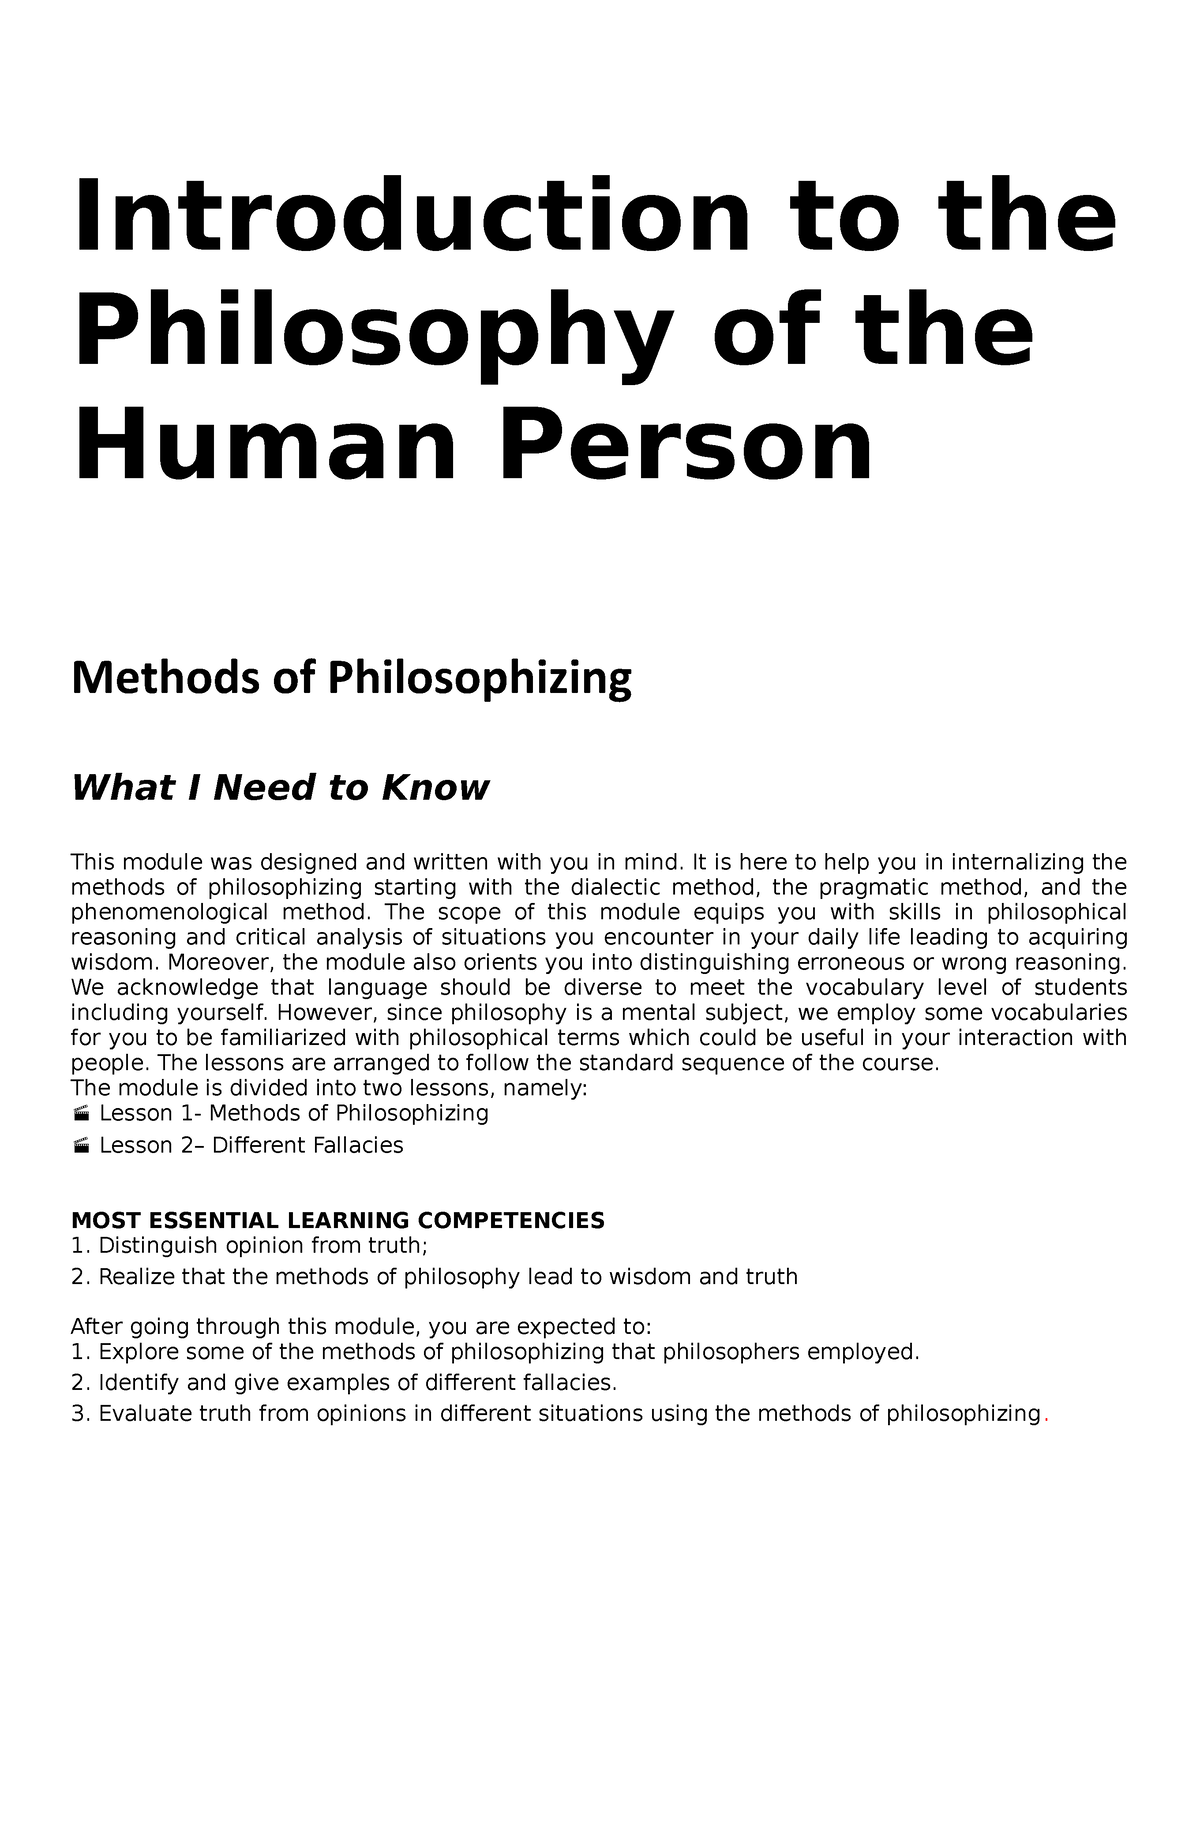 Philo Q1 Mod 22 Methods Of Philosophizing Introduction To The Philosophy Of The Human Person 5382